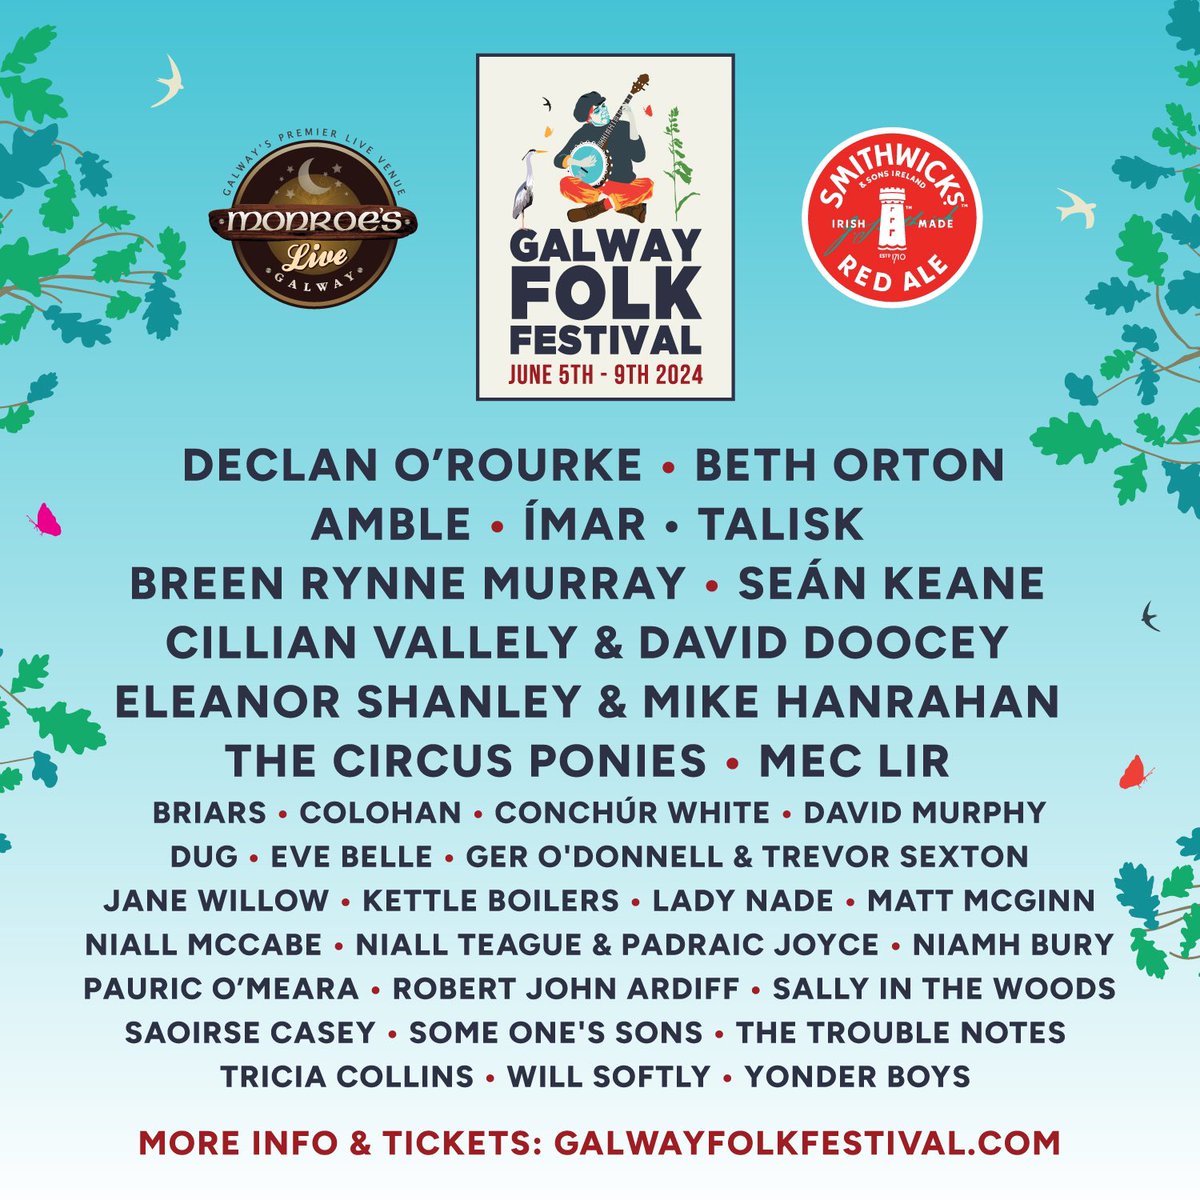 We’re delighted to be playing at this year’s Galway Folk Festival alongside some amazing artists on June 8th. Really excited to make our Galway debut! Cans by the Spanish Arch, anyone? ☀️ @FolkFestGalway @MonroesLive